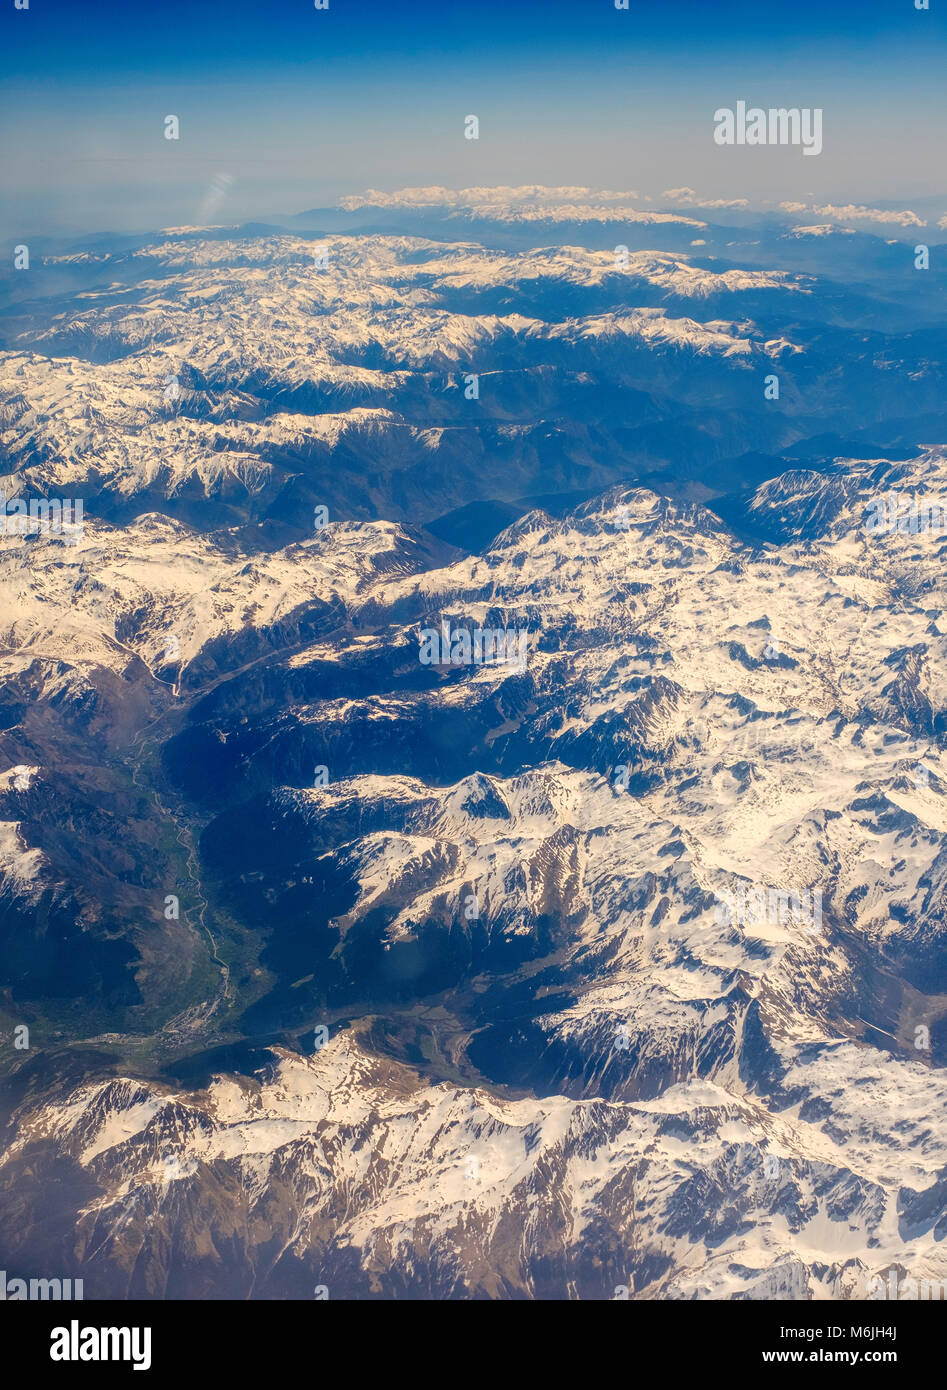 PYRENEES MOUNTAINS WITH SNOW FROM THE AIR. Stock Photo